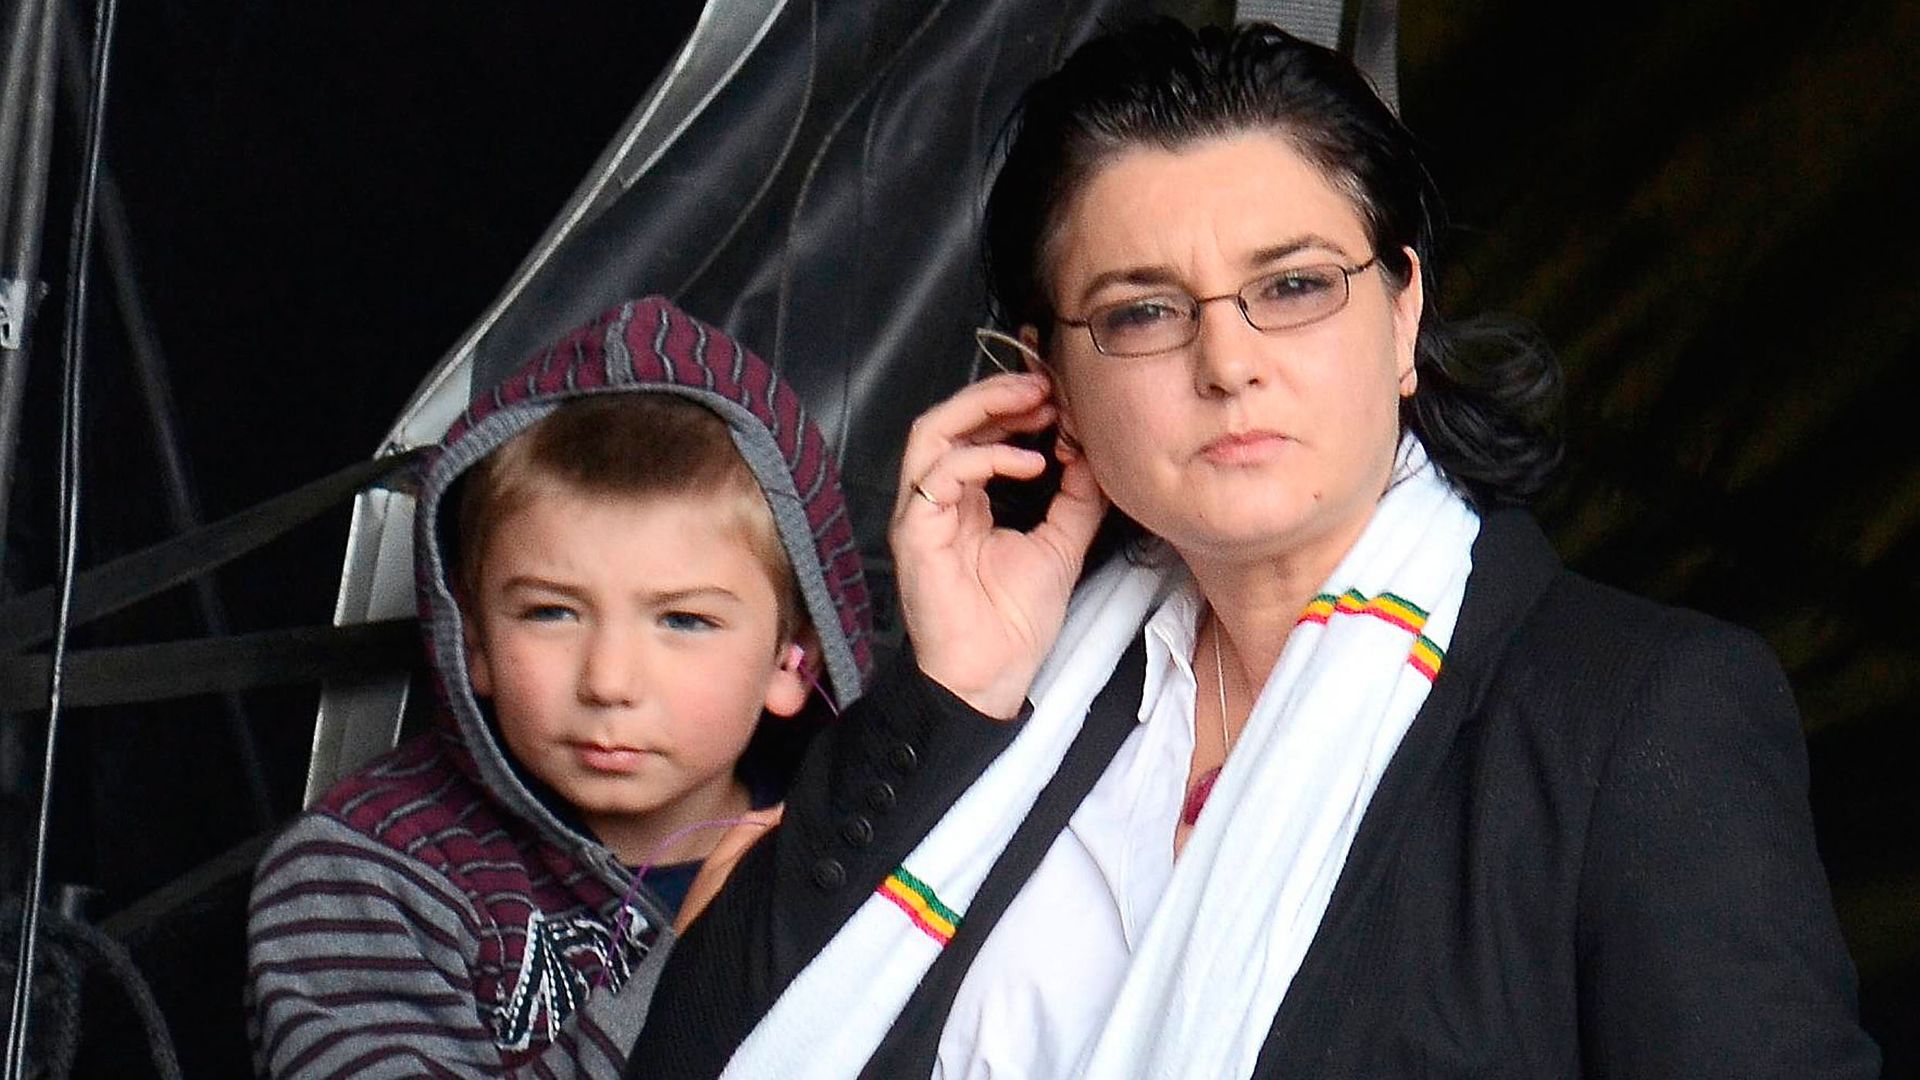 Singer Sinead O'Connor with her son Shane